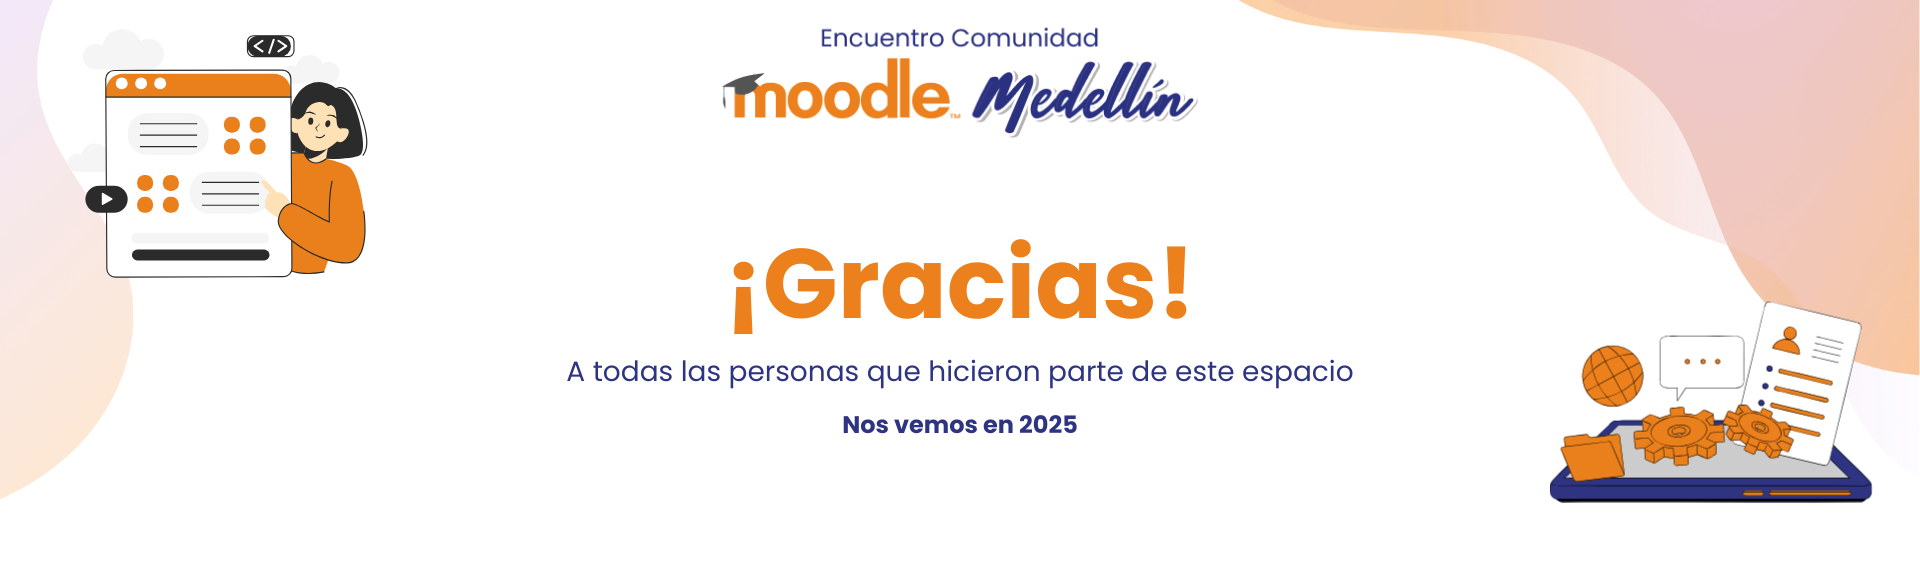 banner moodle evento.png